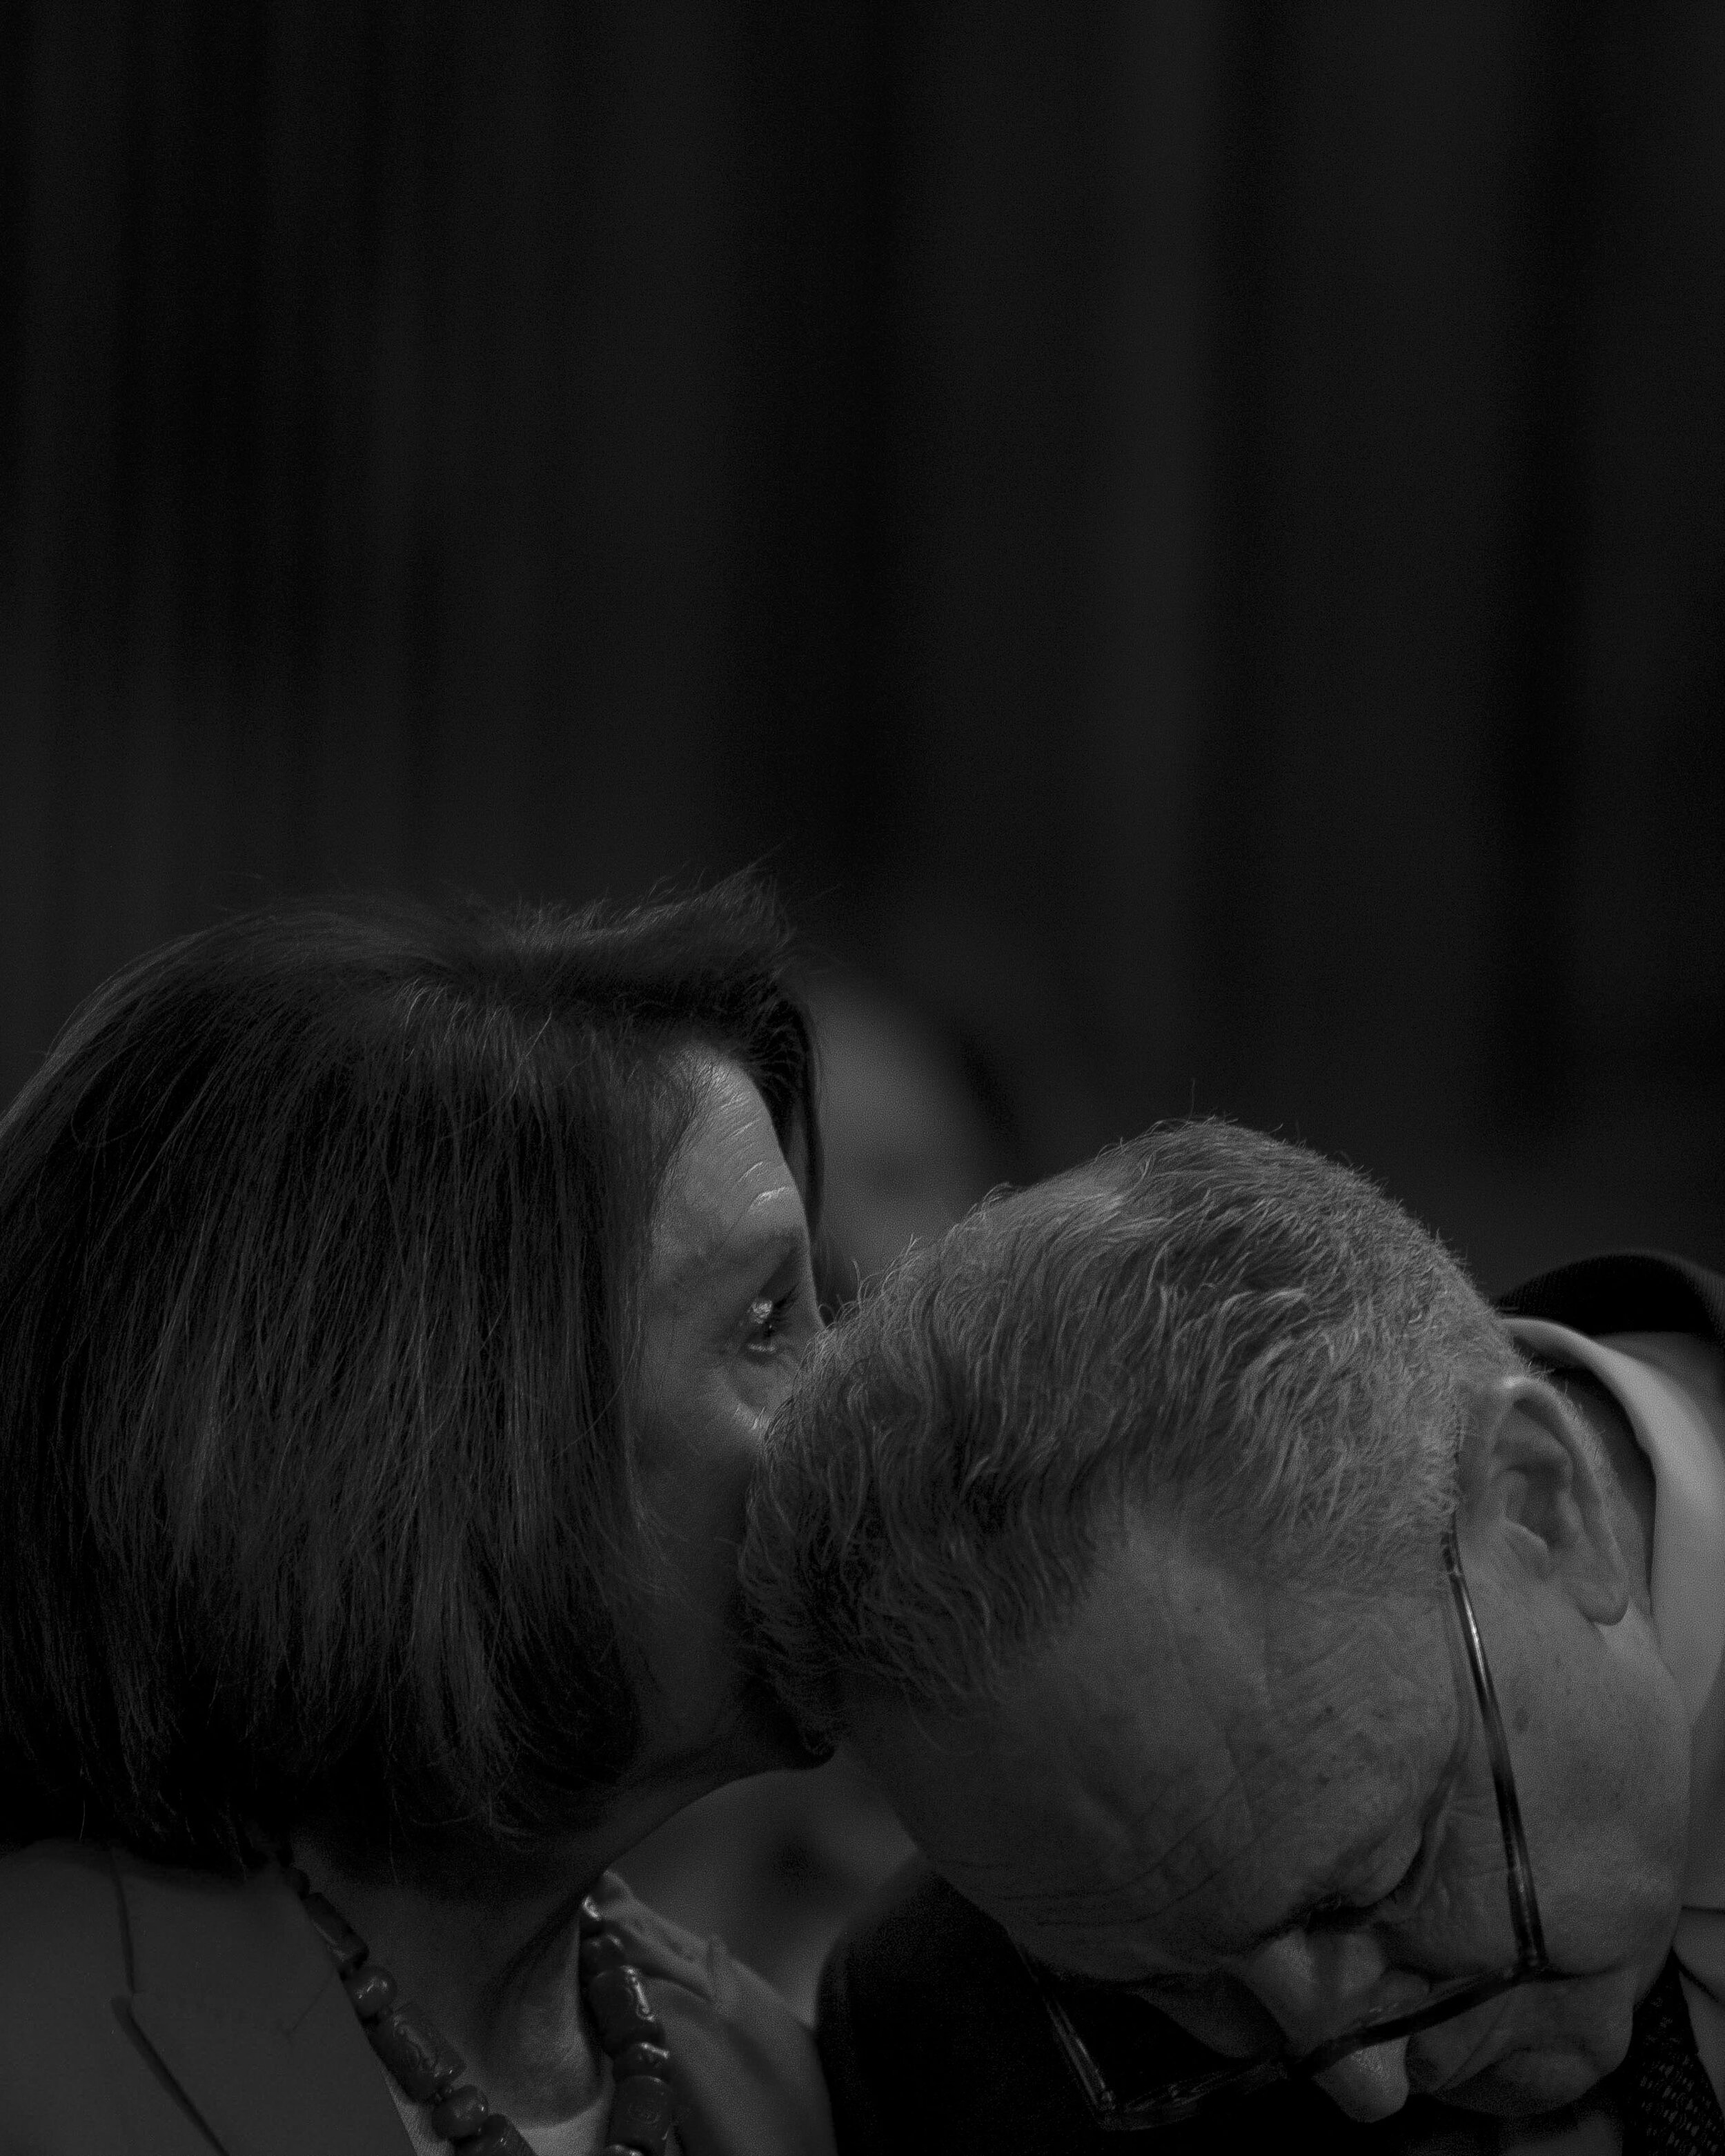  1/16/19,  Capitol Hill, Washington, D.C. Speaker Nancy Pelosi (D-Calif.) and Senate Minority Leader Chuck Schumer (D-N.Y.) speak privately during the announcement of the Raise the Wage Act at a press conference at the Capitol in Washington, D.C. on 